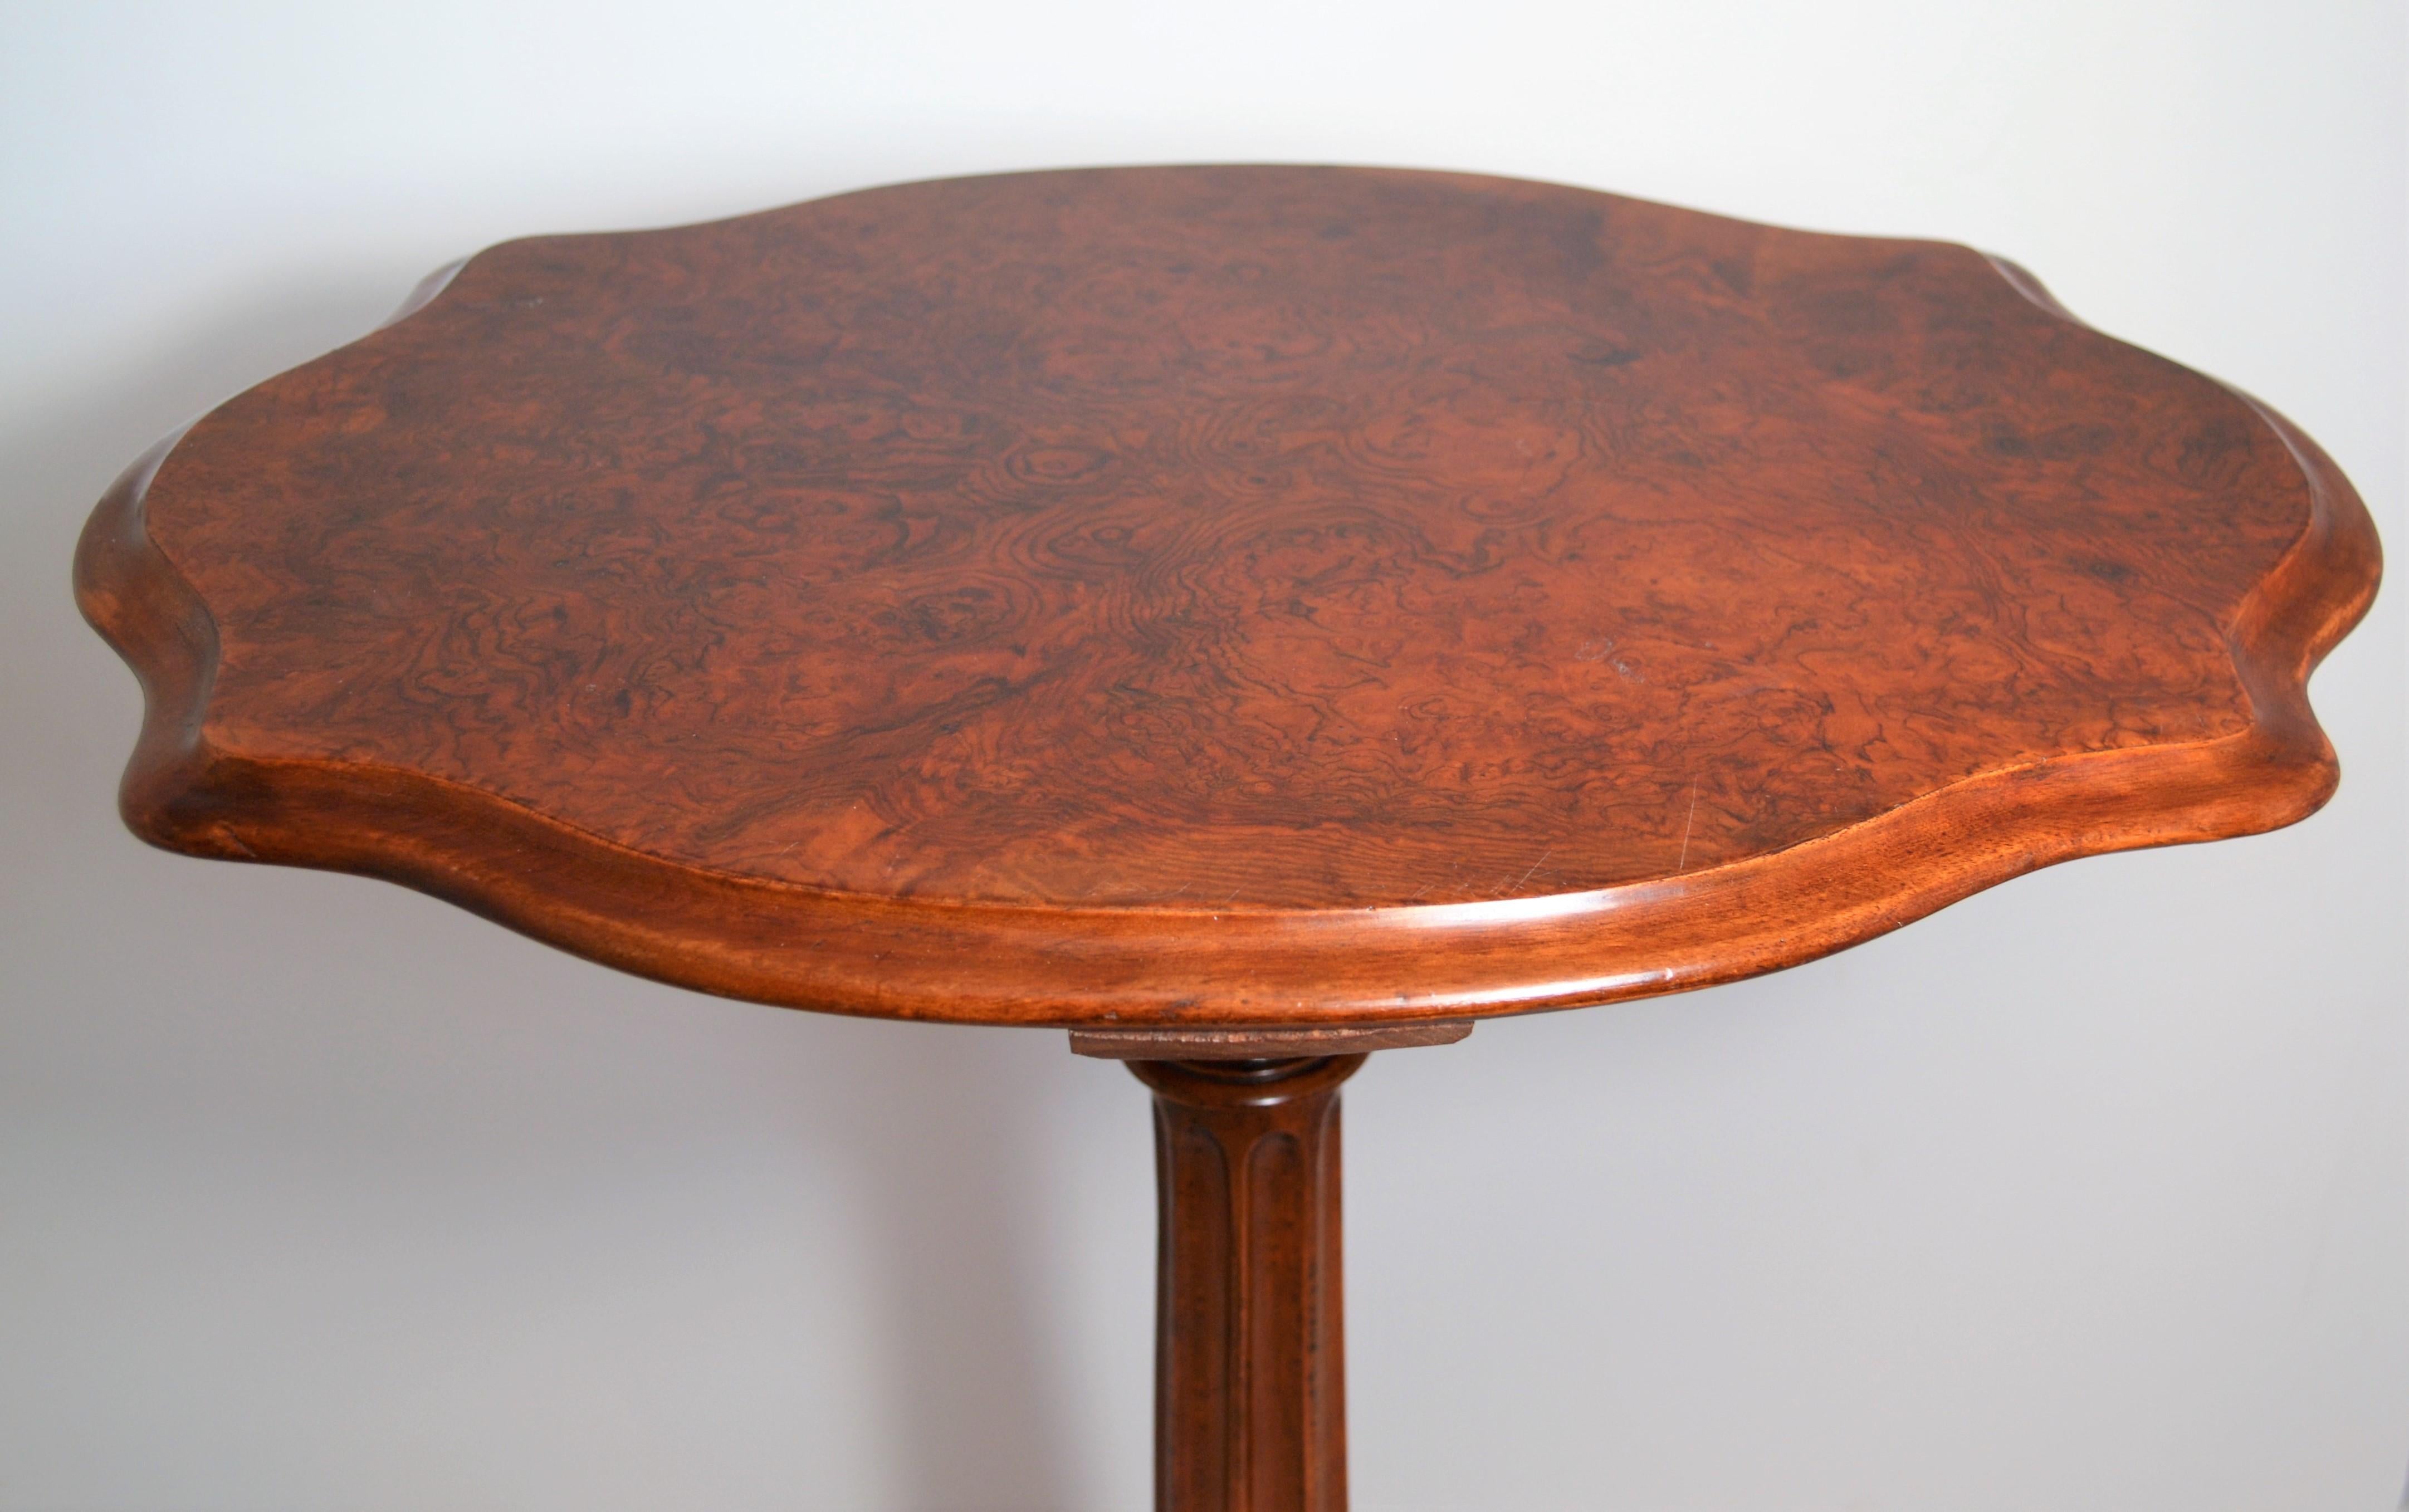 The small burl walnut tables are most appealing and pleasing to the eye.